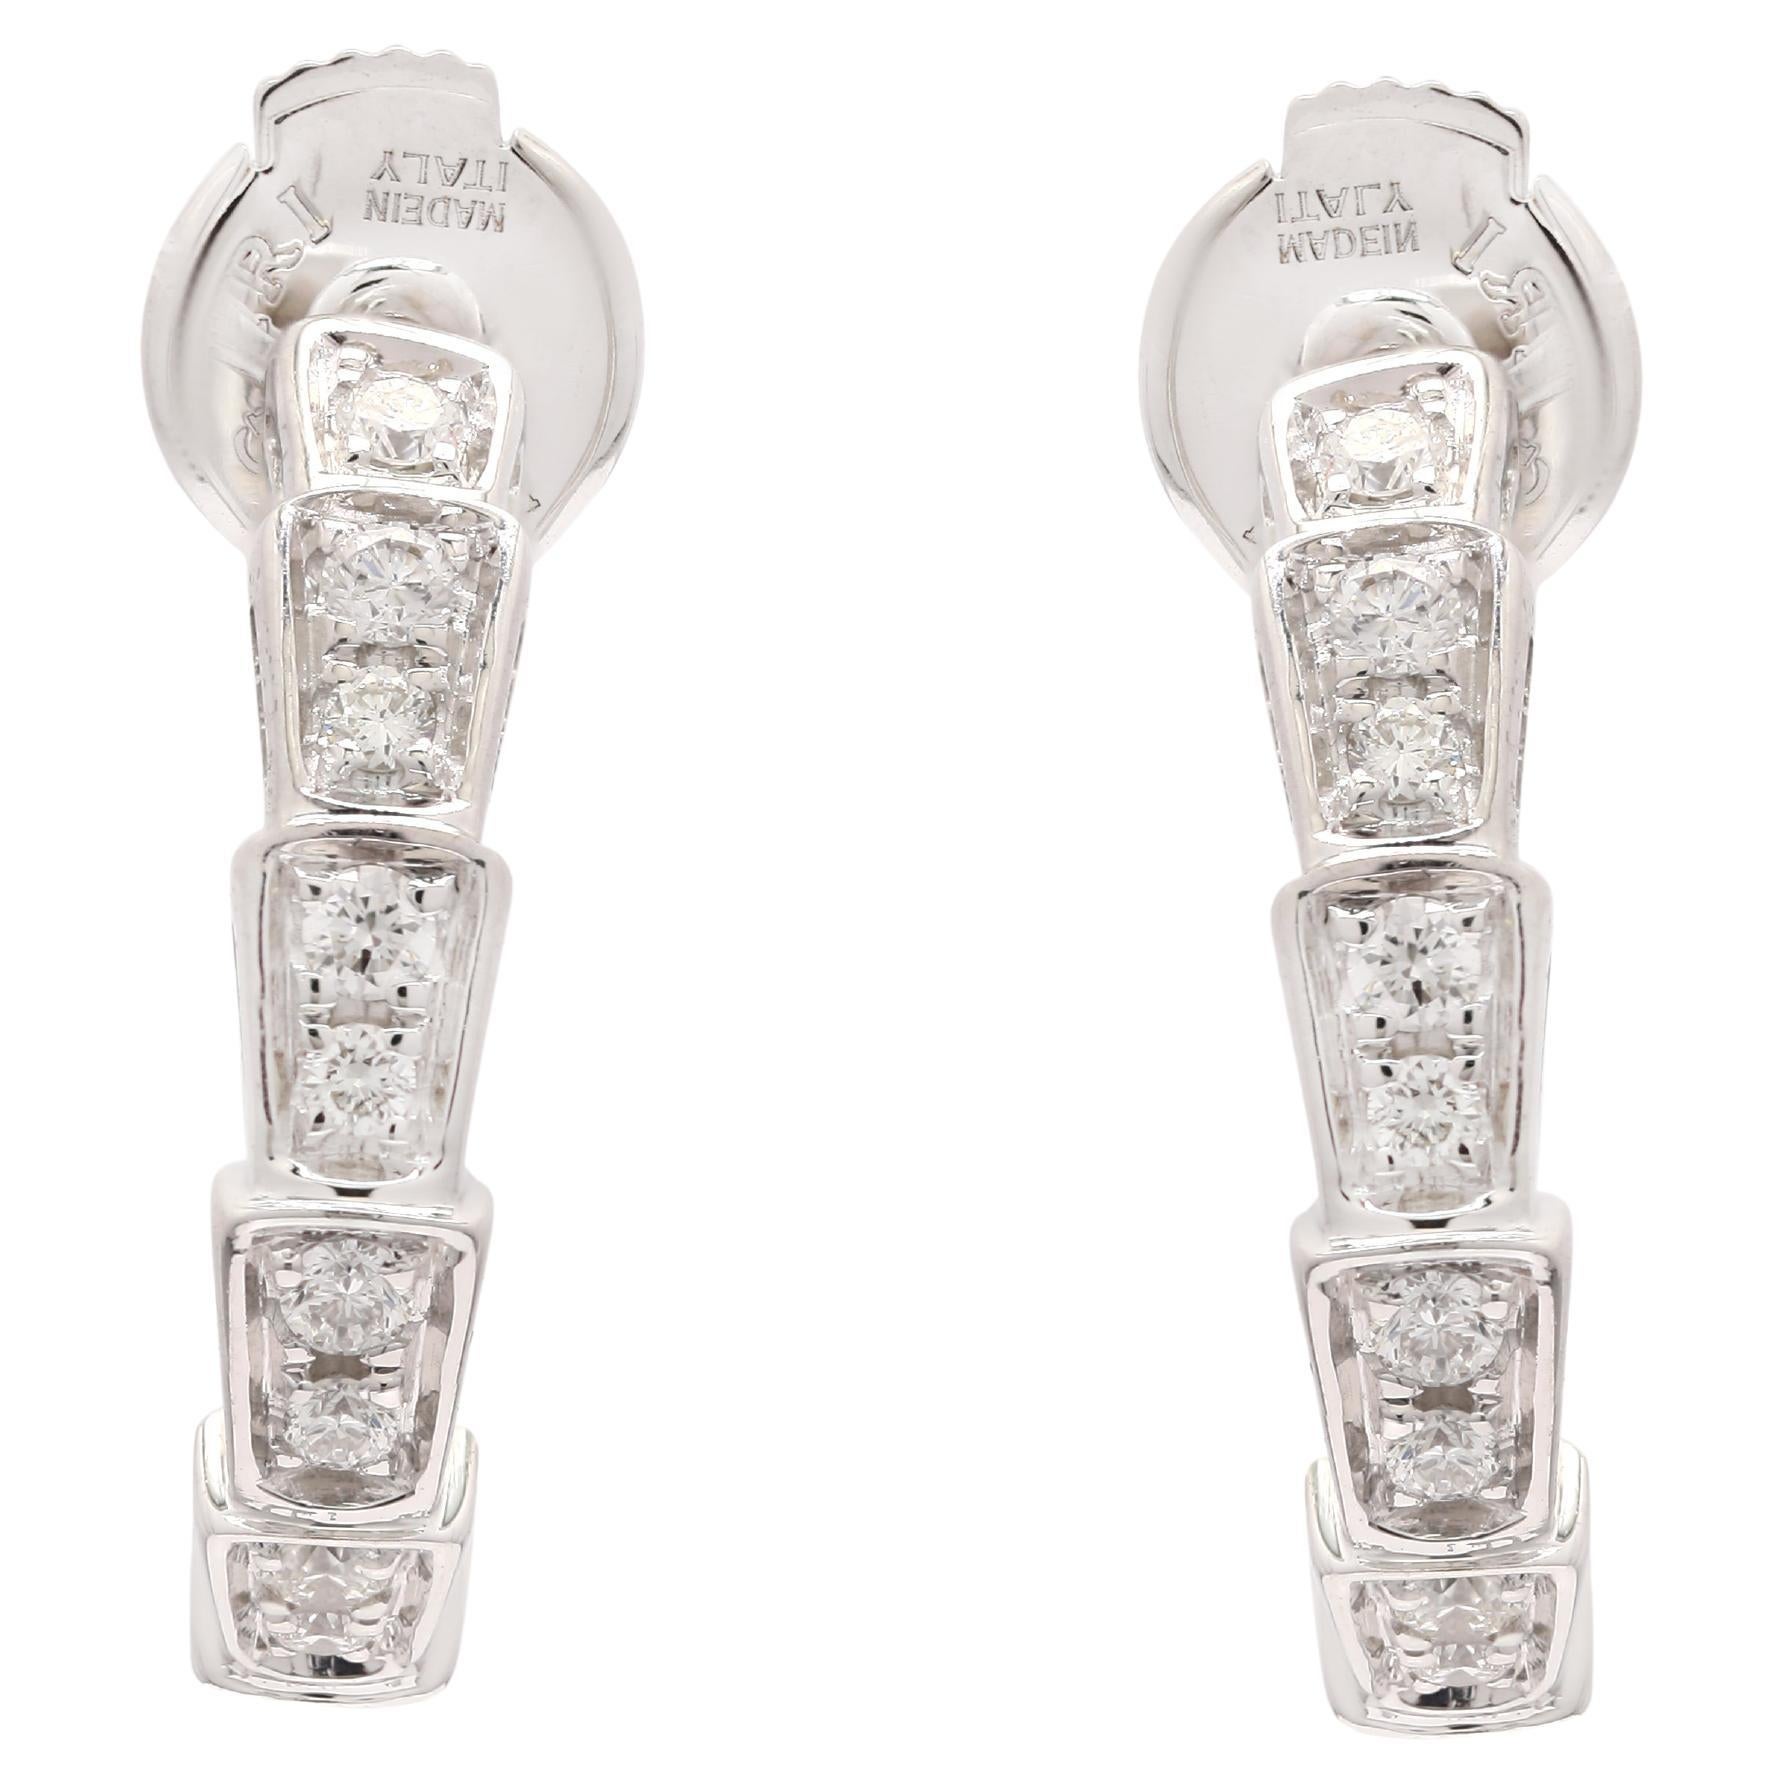 You shall need this designer diamond c-hoop earrings to make a statement with your look. These earrings create a sparkling, luxurious look featuring round cut gemstone.
If you love to gravitate towards unique styles, this piece of jewelry is perfect